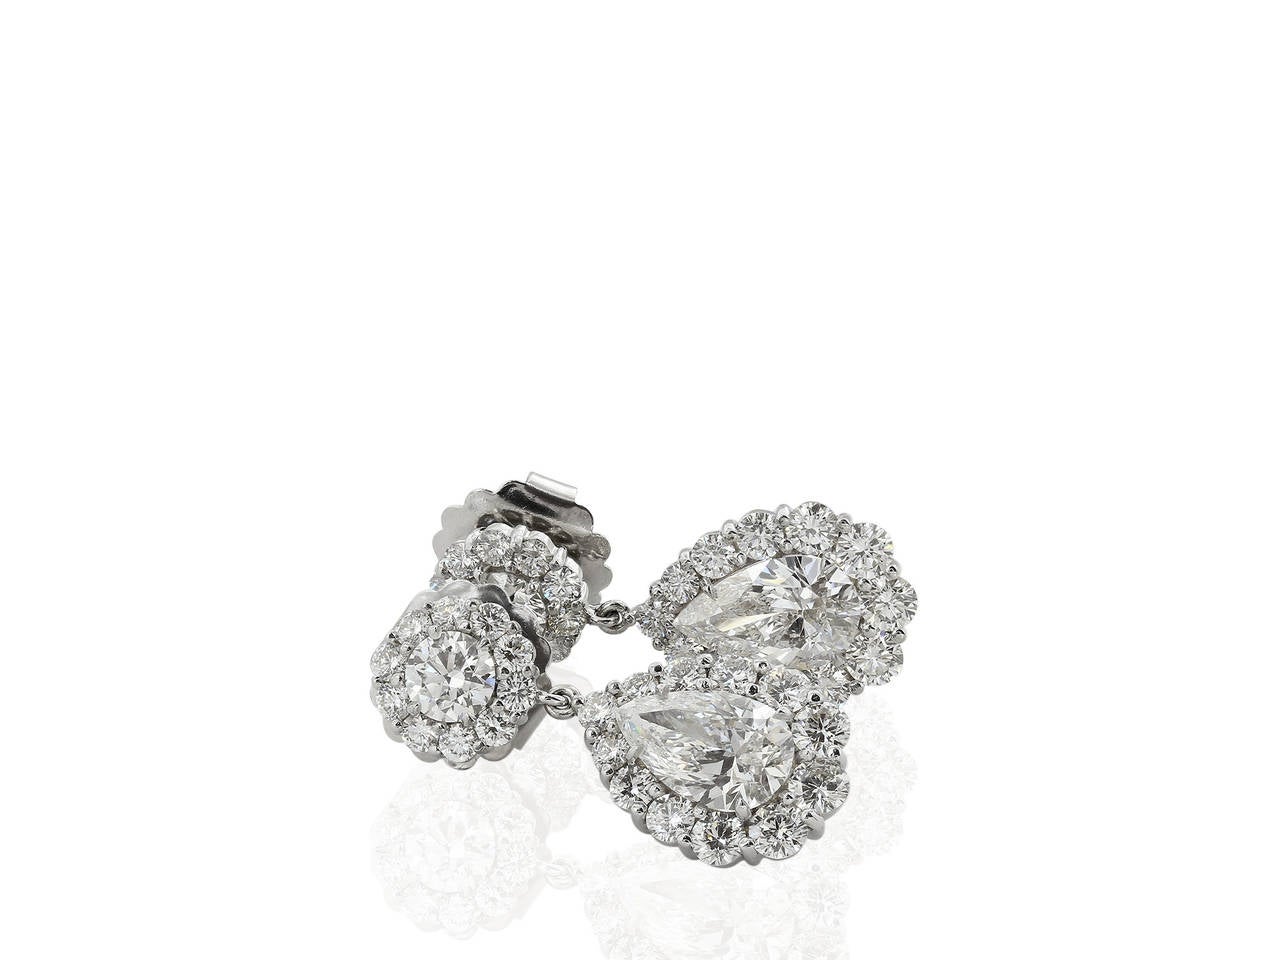 Custom made 18 karat white gold cluster style drop earrings featuring 1 pear cut diamond drop weighing 1.50 carats, measuring 9.78 - x 6.29 x 3.88 mm, having a color and clarity of G/SI1 and GIA report 2147897142, a second pear cut diamond drop